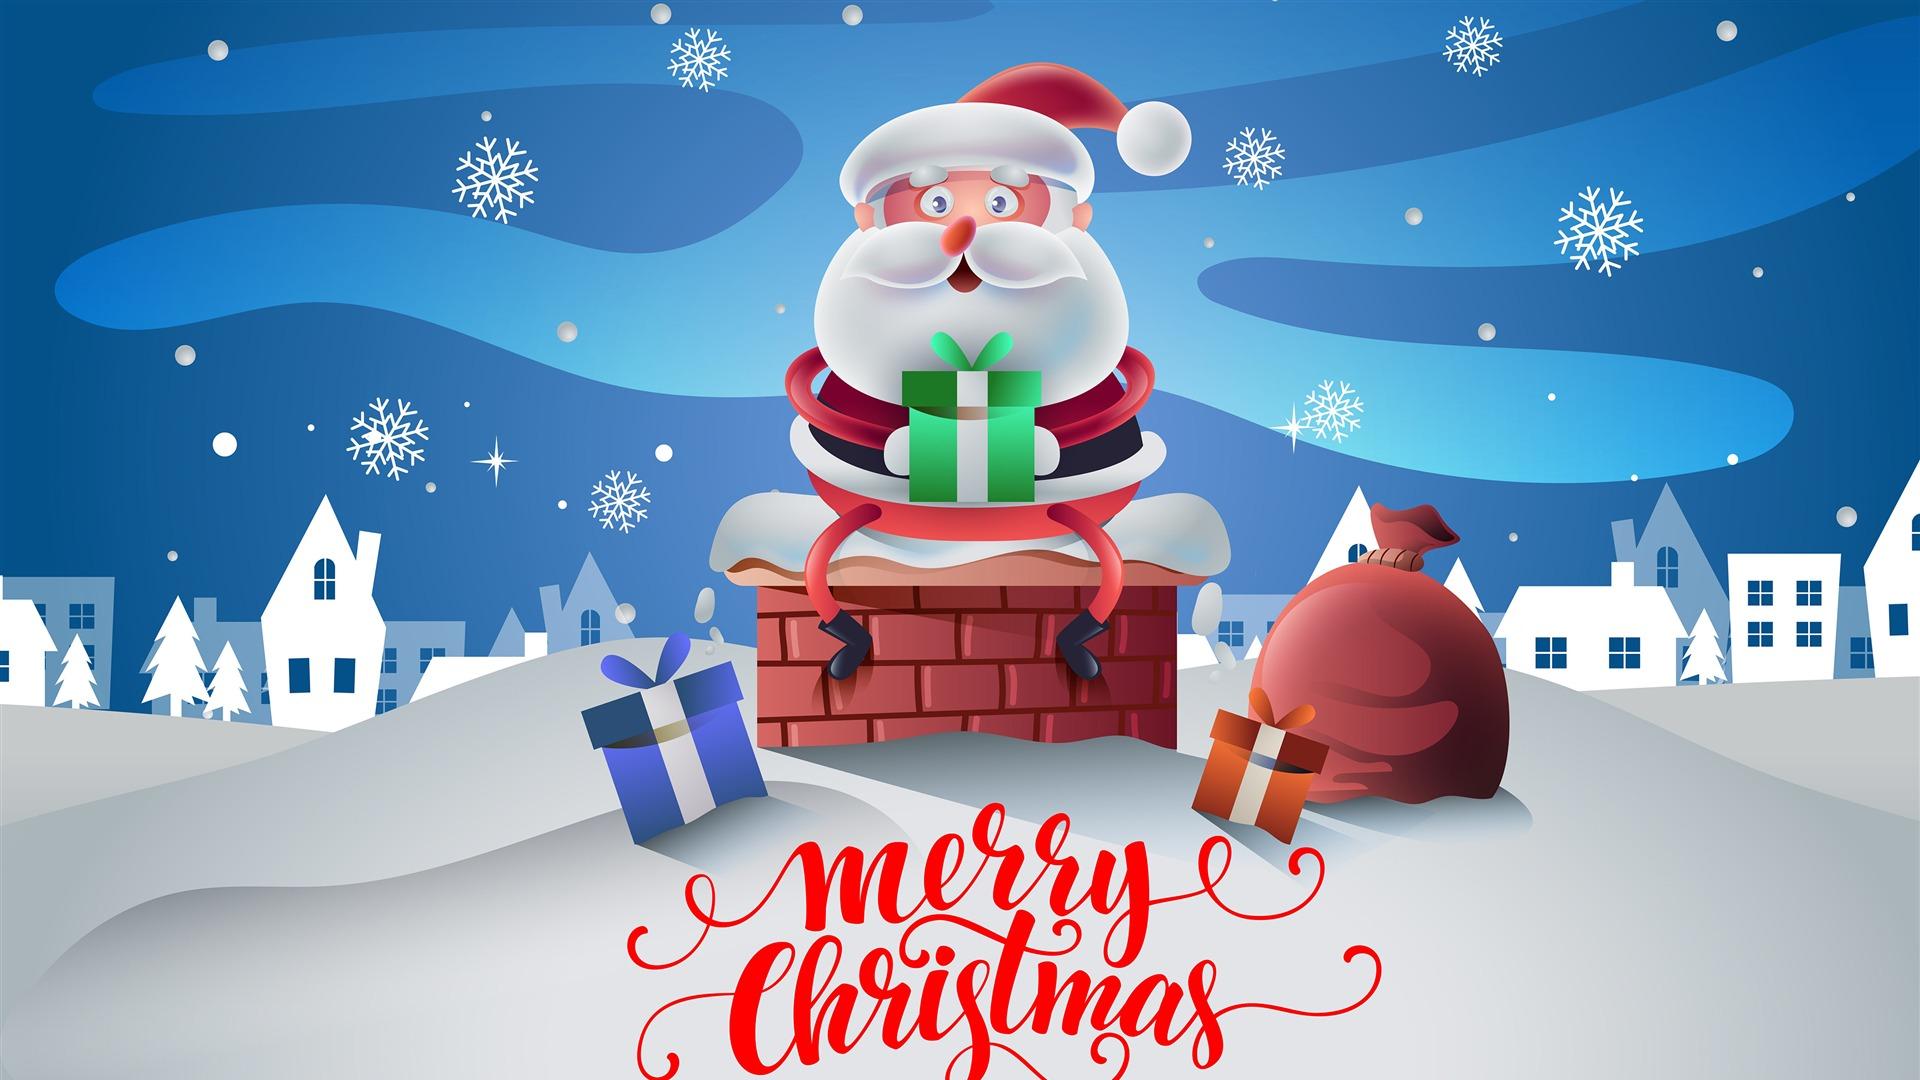 Merry Christmas HD Wallpaper 1080p 2019 Collection